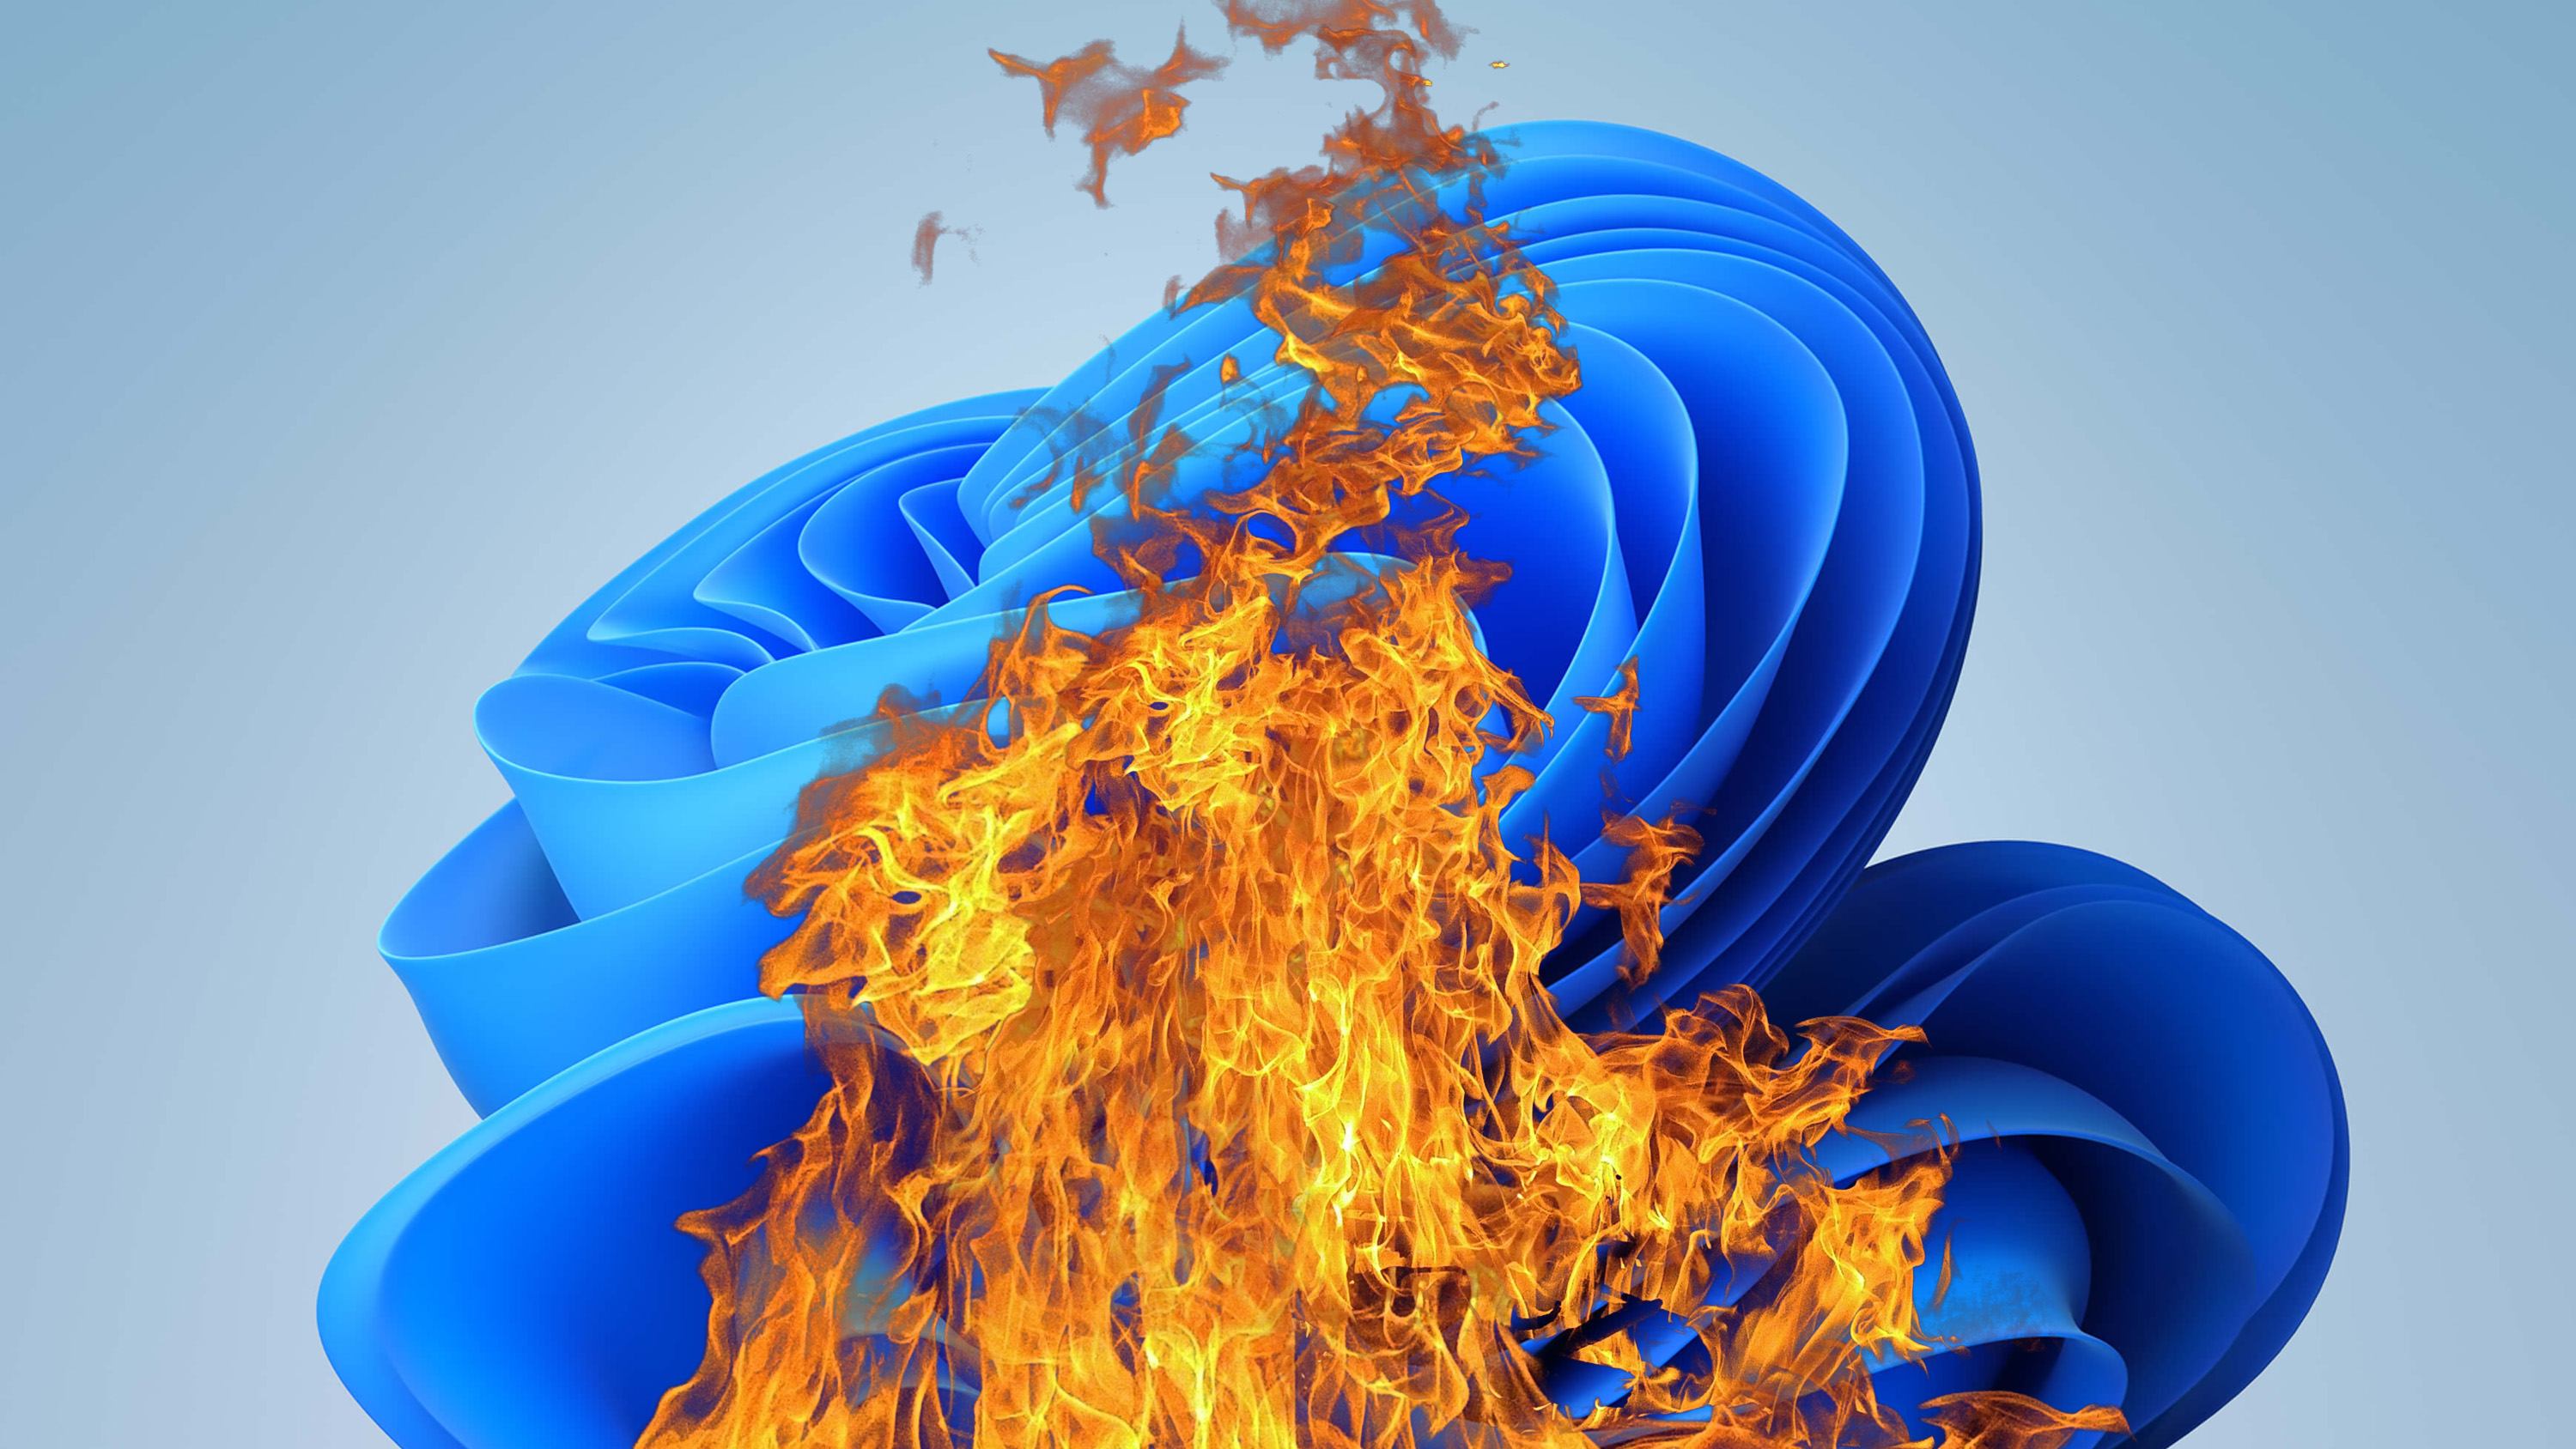 If your CPU is on fire then Microsoft has a Windows 11 workaround